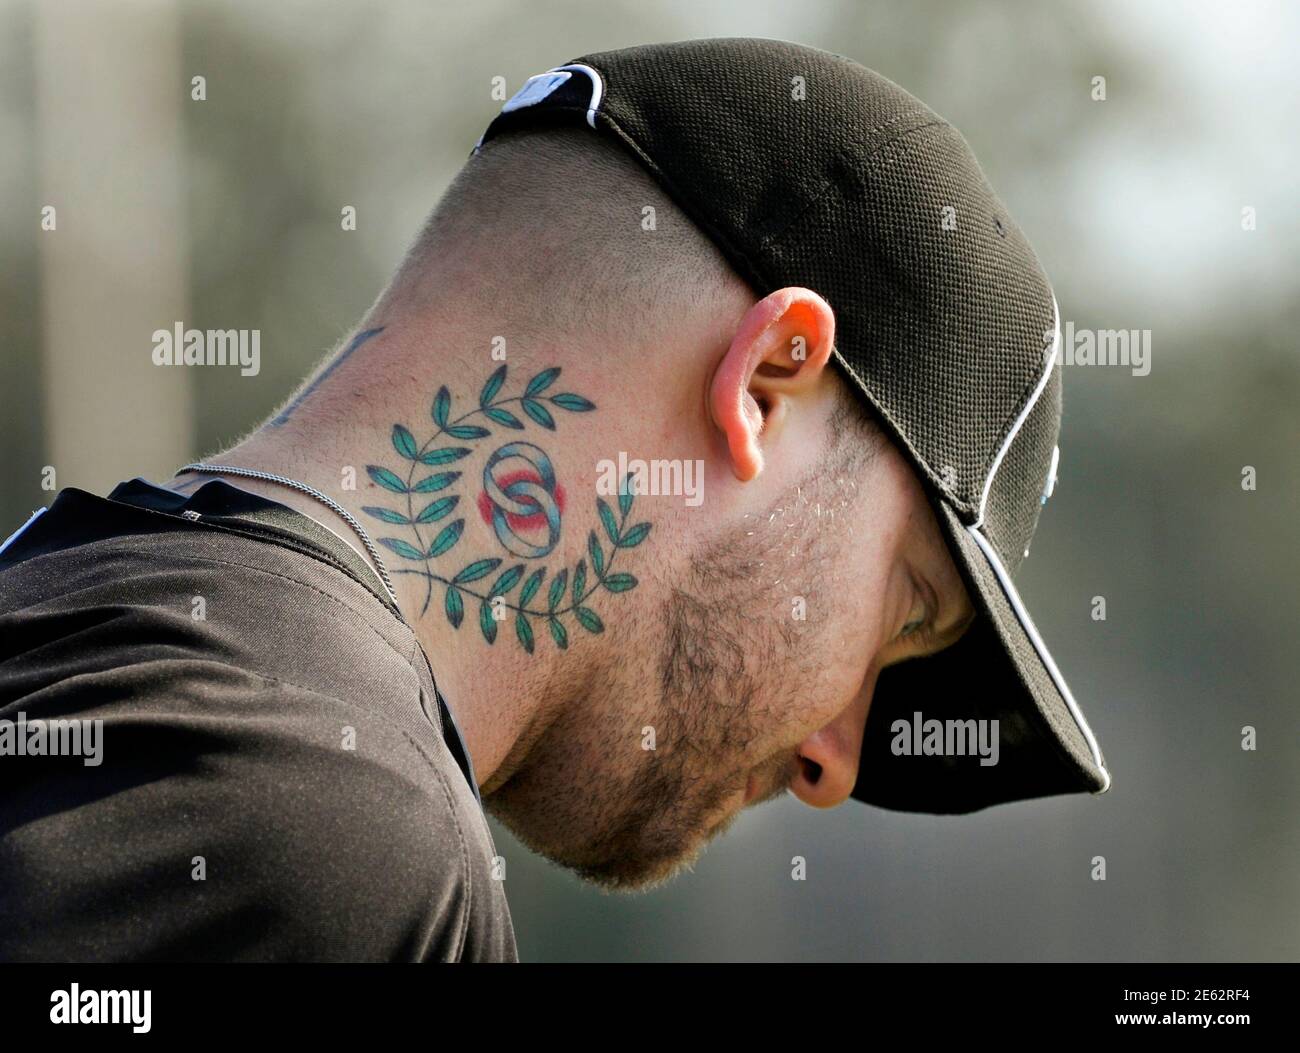 Tattoos On Neck High Resolution Stock Photography And Images Alamy